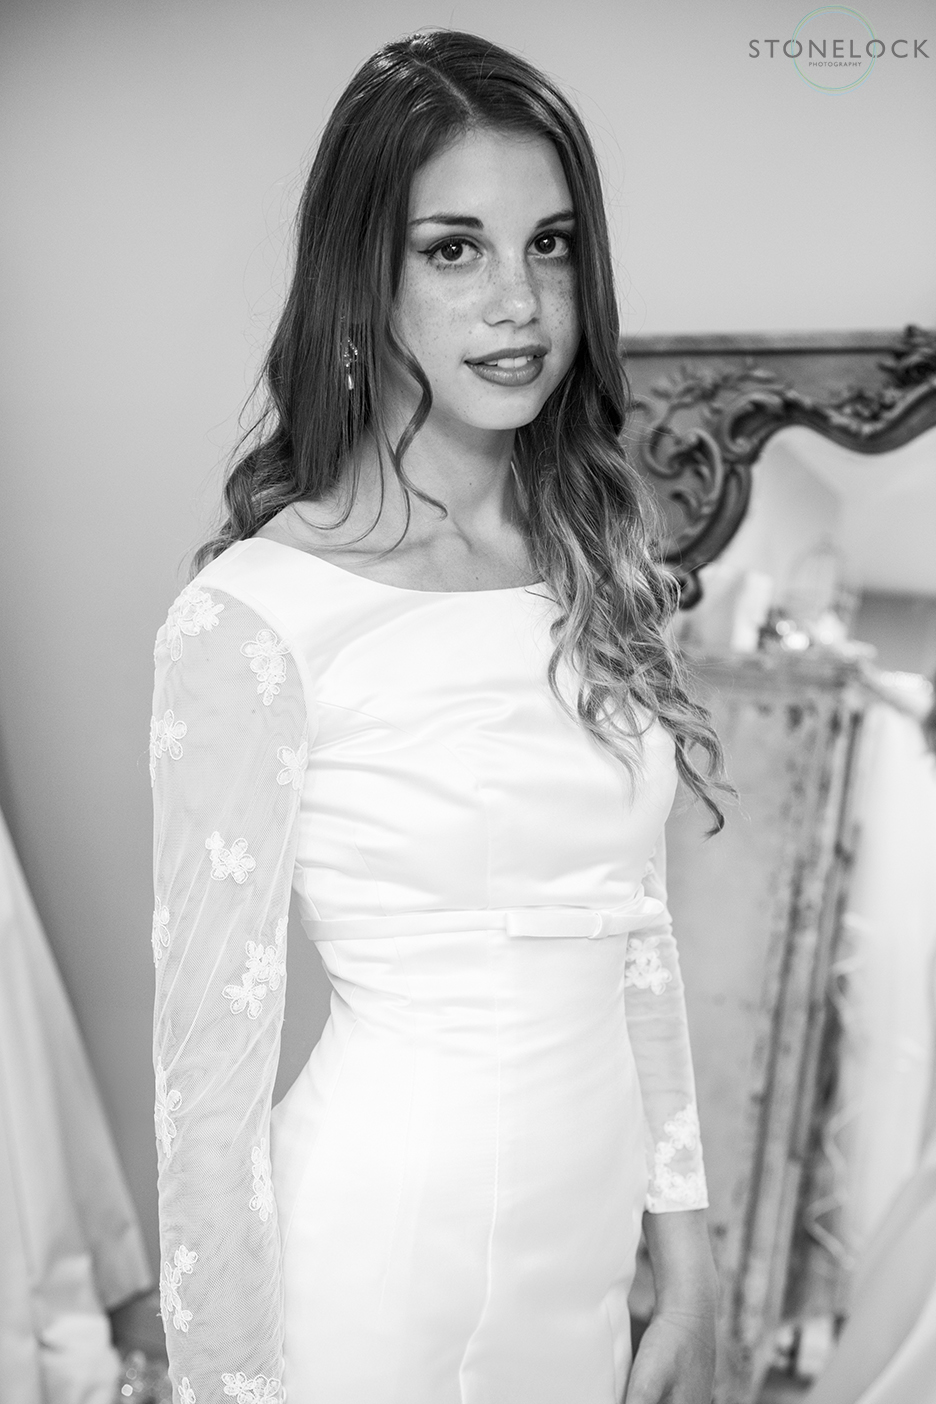 A model wears Lou Lou emilia, long sleeve wedding dress at Helena Fortley Bridal Boutique in Caterham, Surrey. The photo is in black and white.